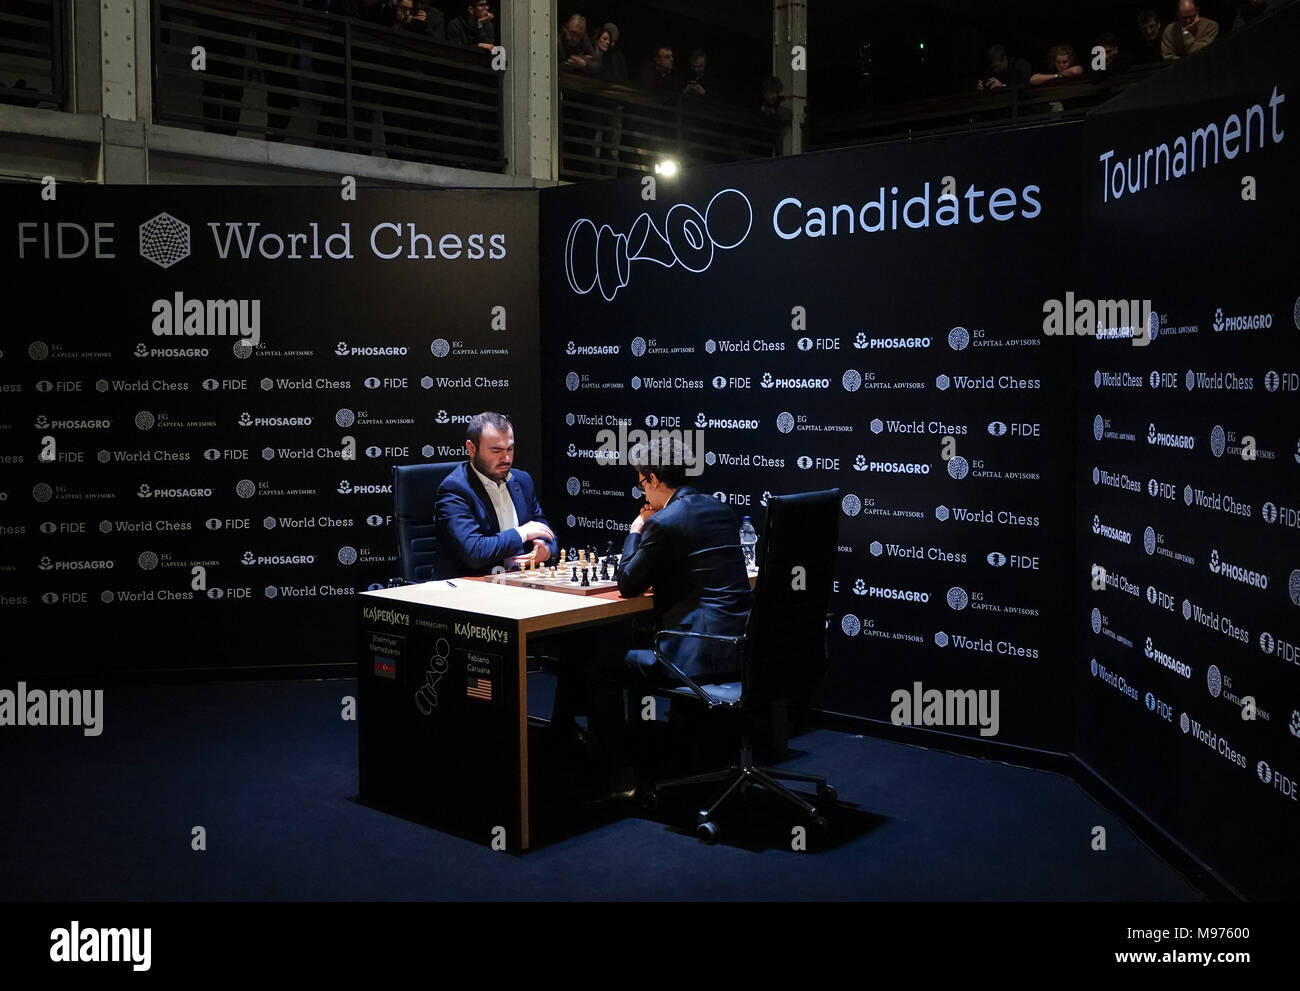 22 March 2018, Germany, Berlin: Italian-American chess champion Fabiano  Caruana competes against Shakhriyar Mamedyarov (not shown), a chess  champion from Azerbaijan, at this year's FIDE World Chess Candidates  Tournament at the Kuehlhaus